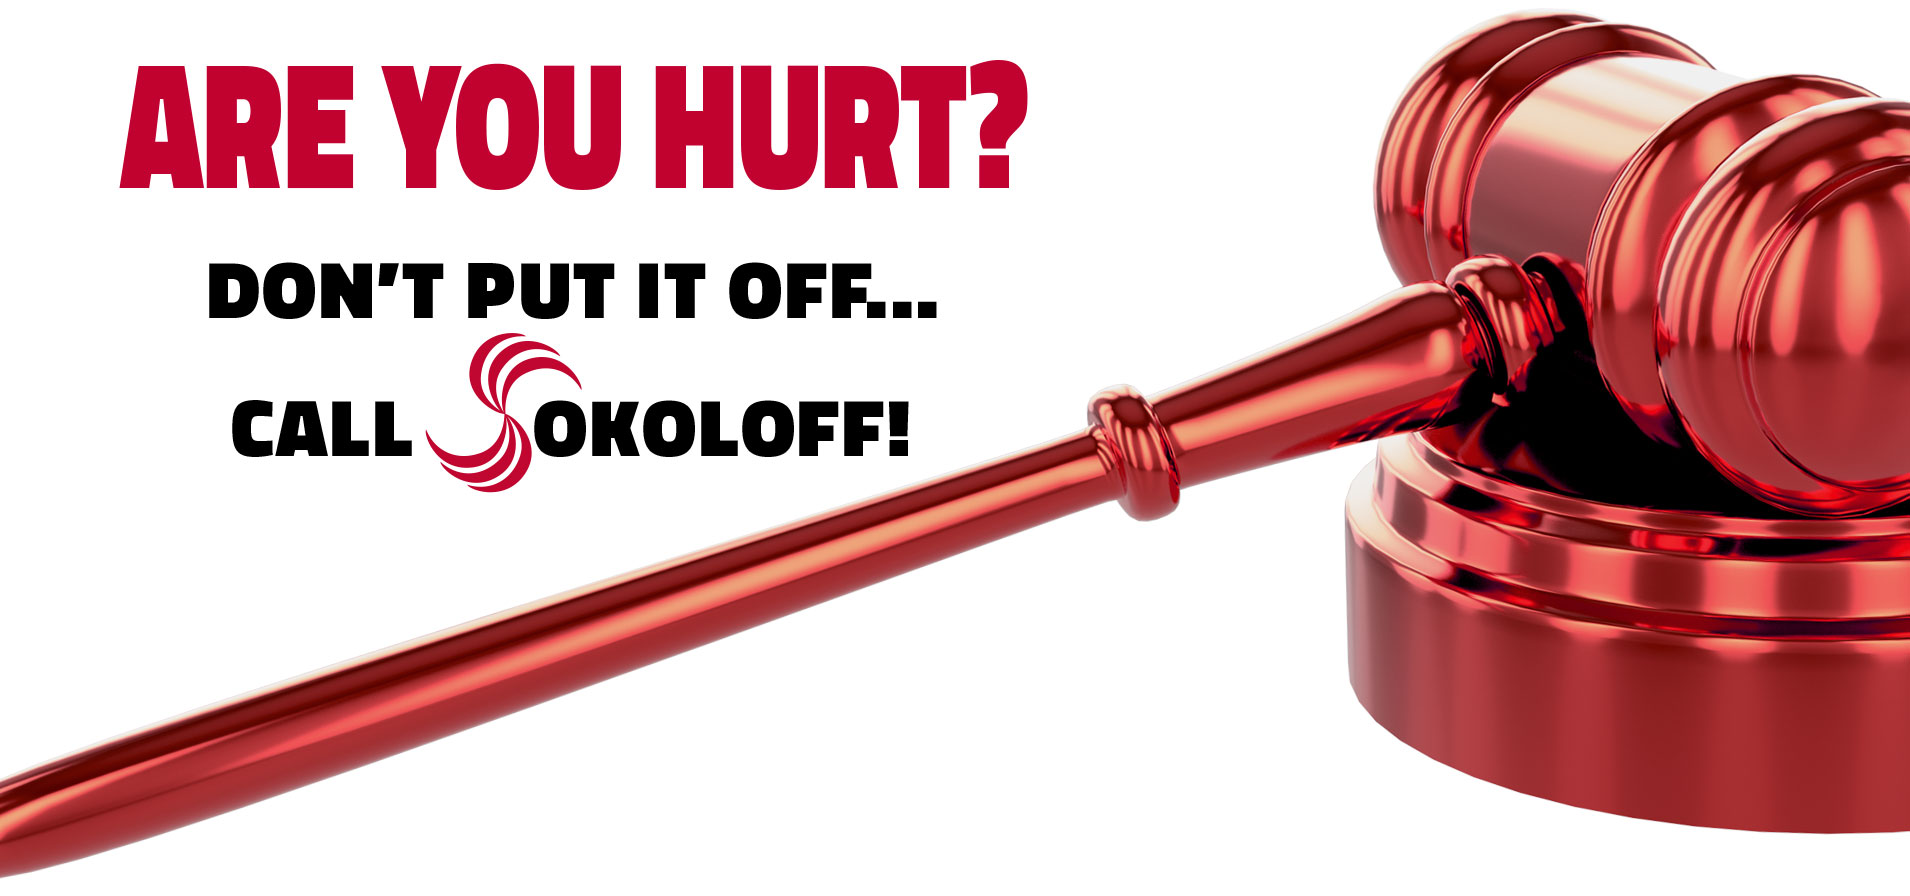 Are you hurt? on't put it off... Call Sokoloff 1-844-966-4878